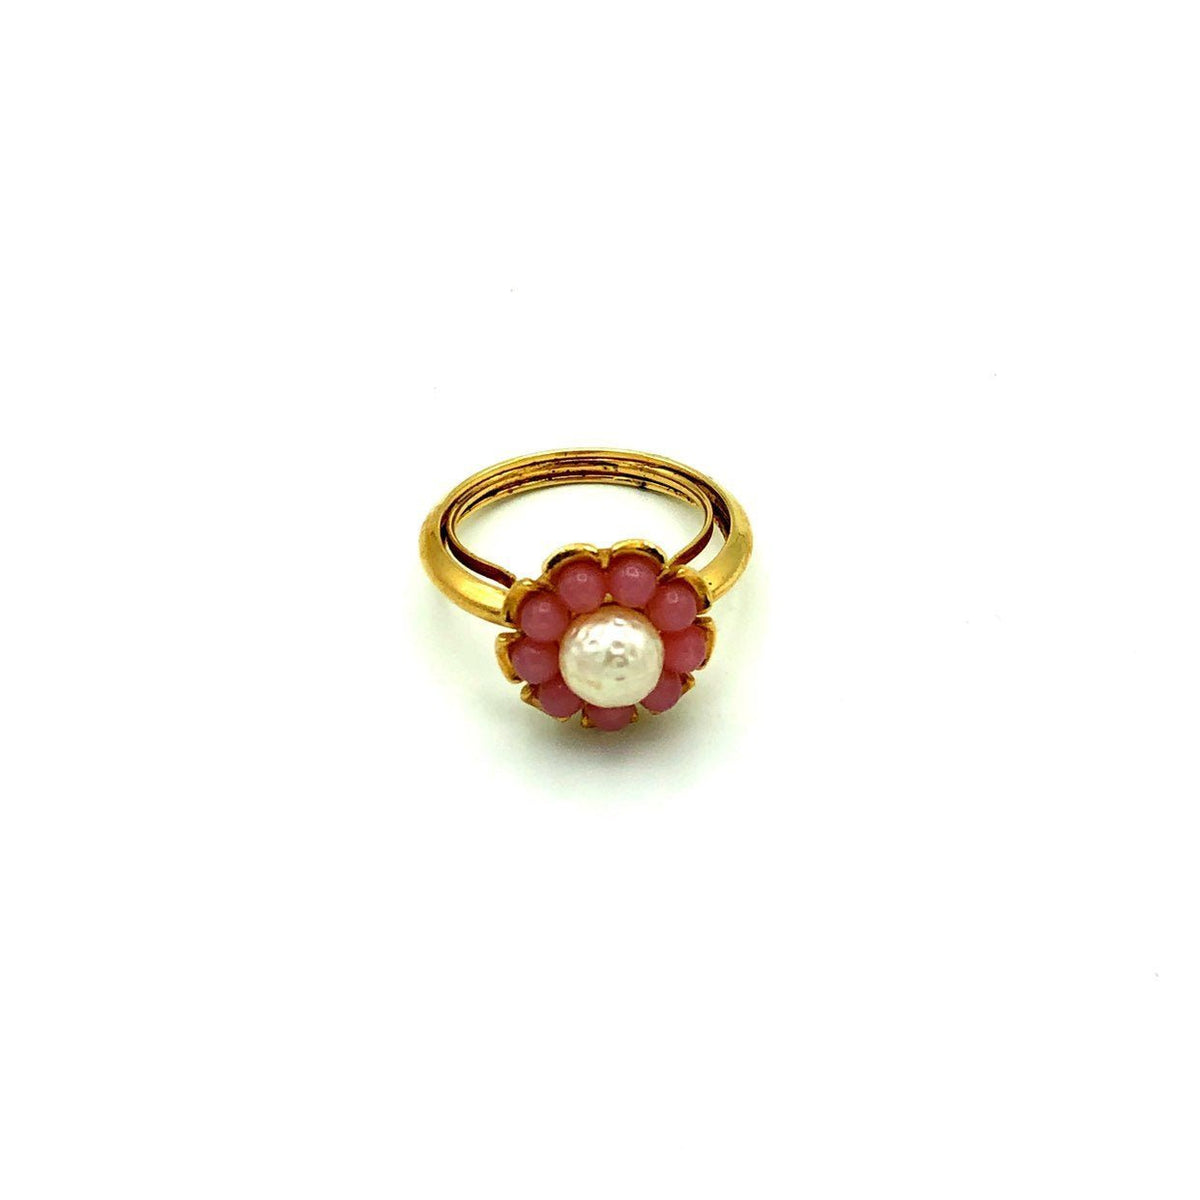 Avon Pearl & Pink Flower Vintage Cocktail Ring - 24 Wishes Vintage Jewelry